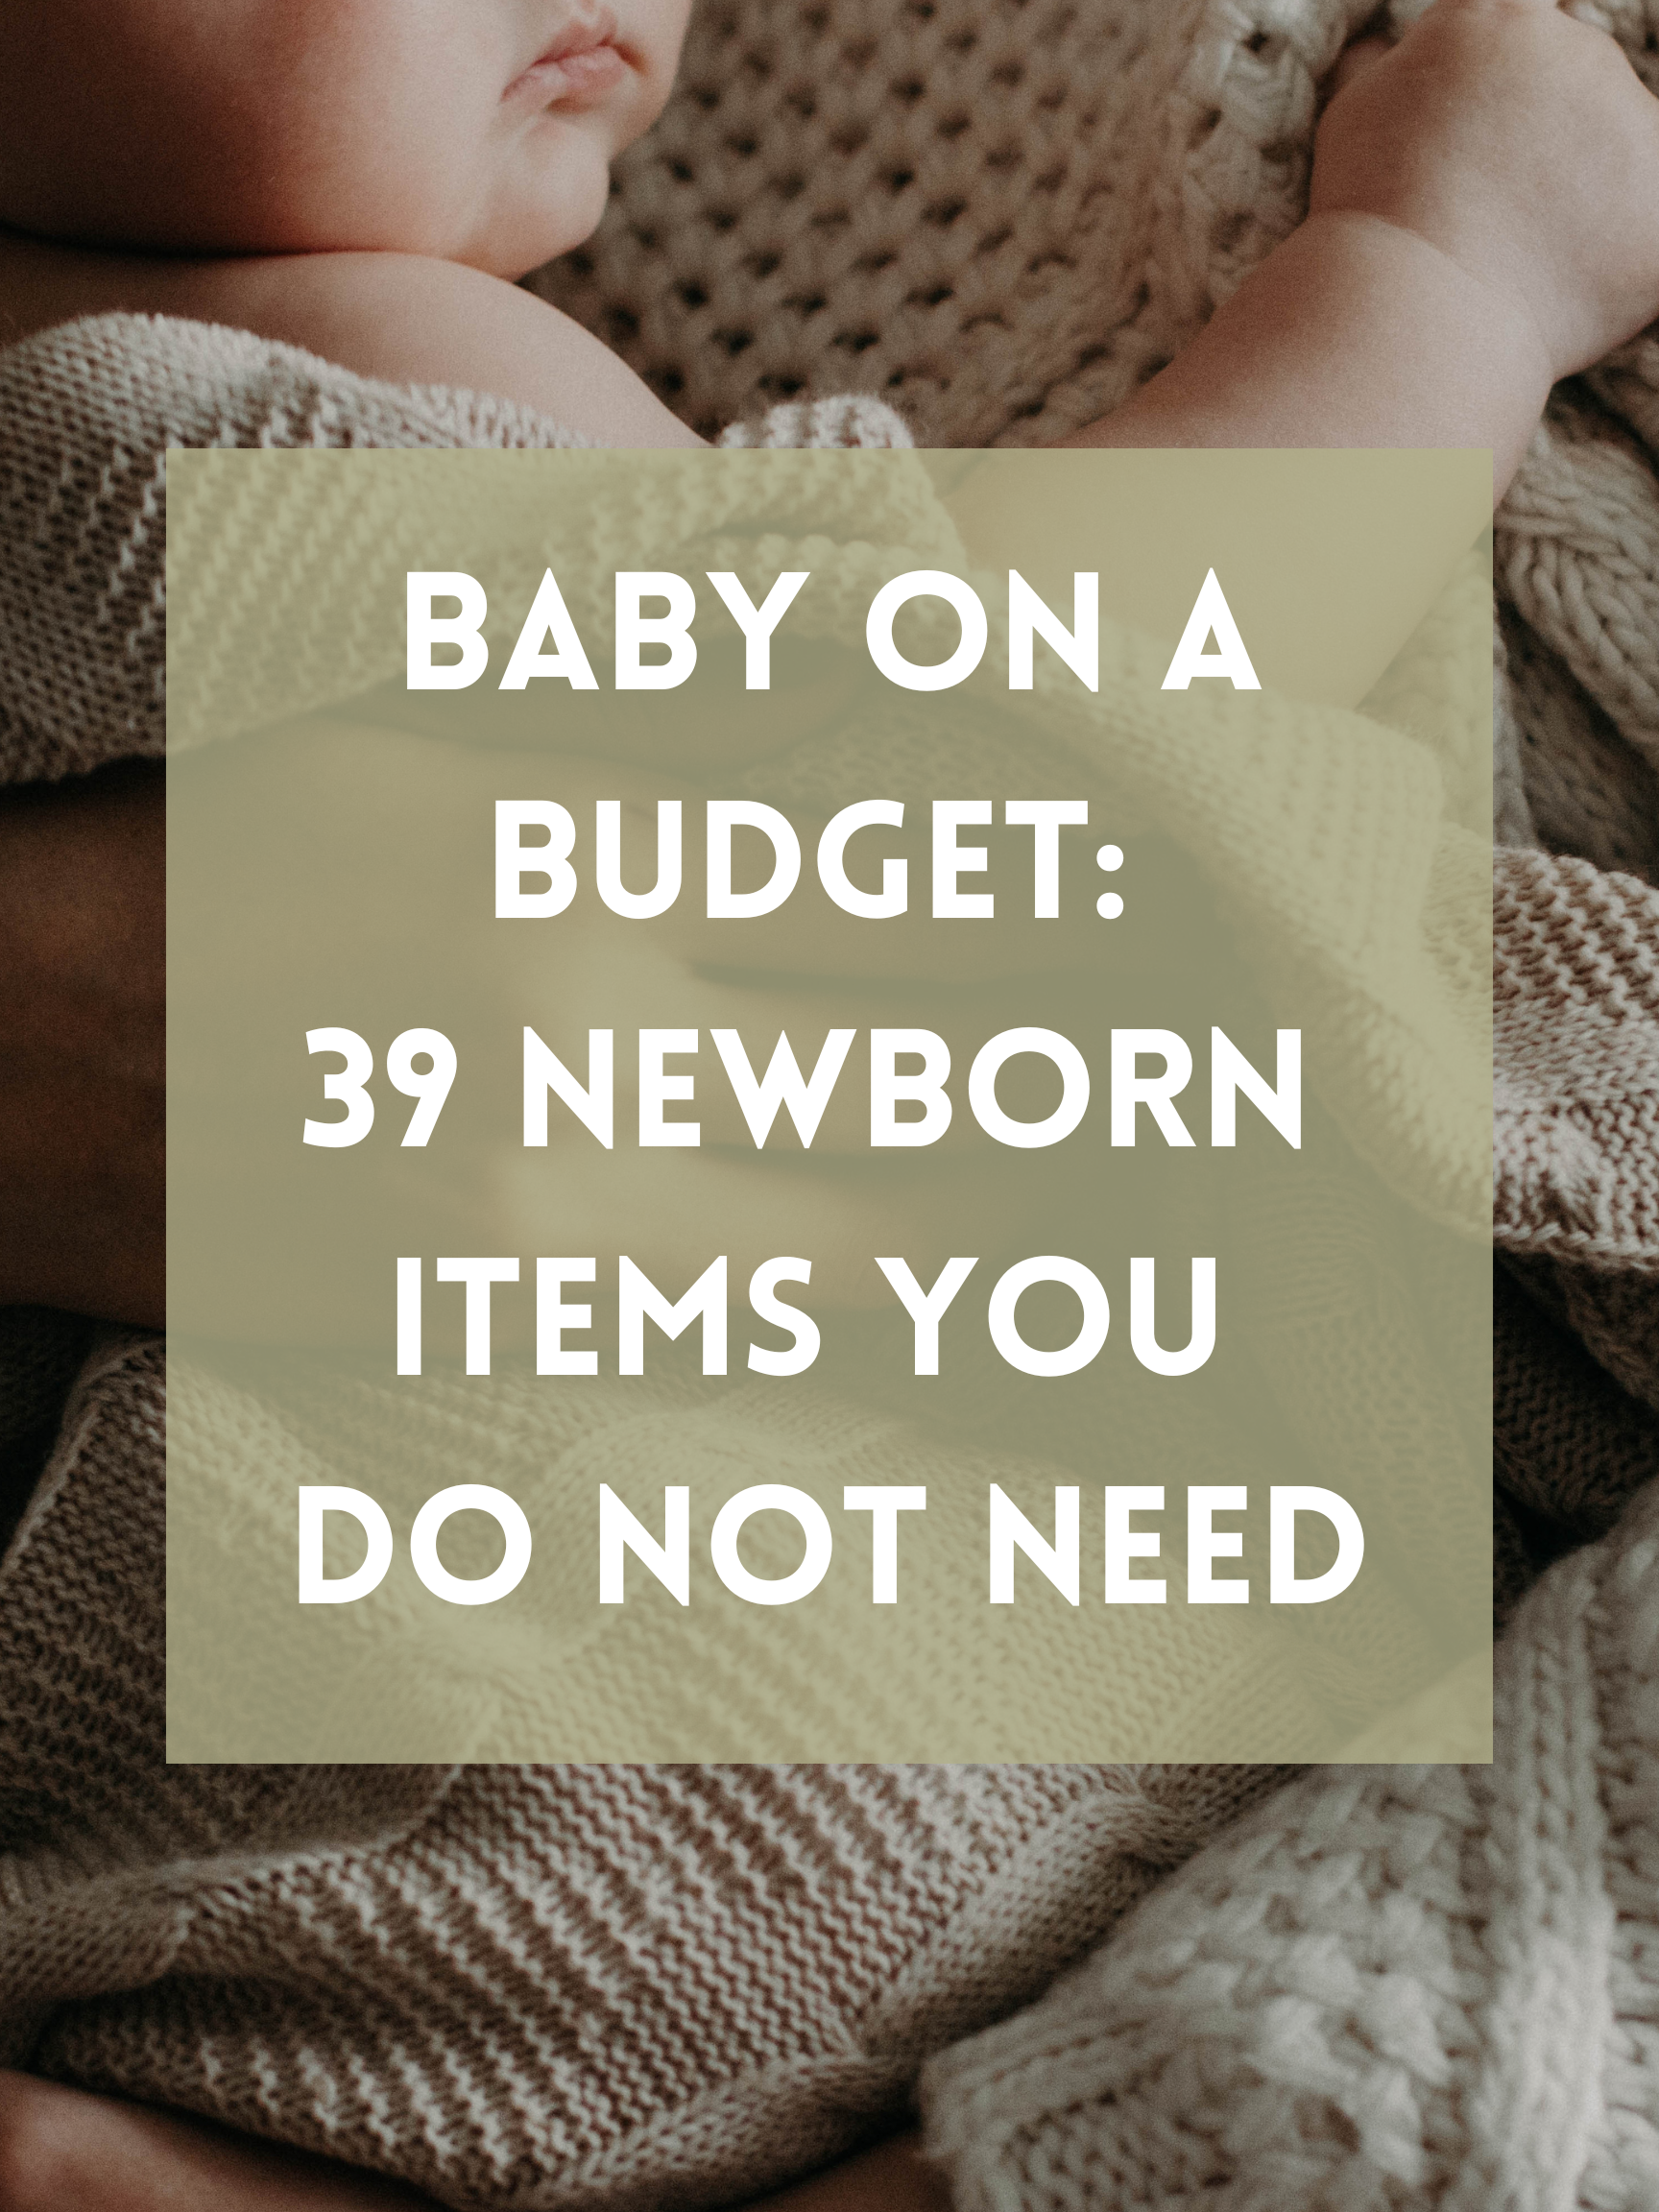 Baby On a Budget: 39 Newborn Items You DO NOT Need